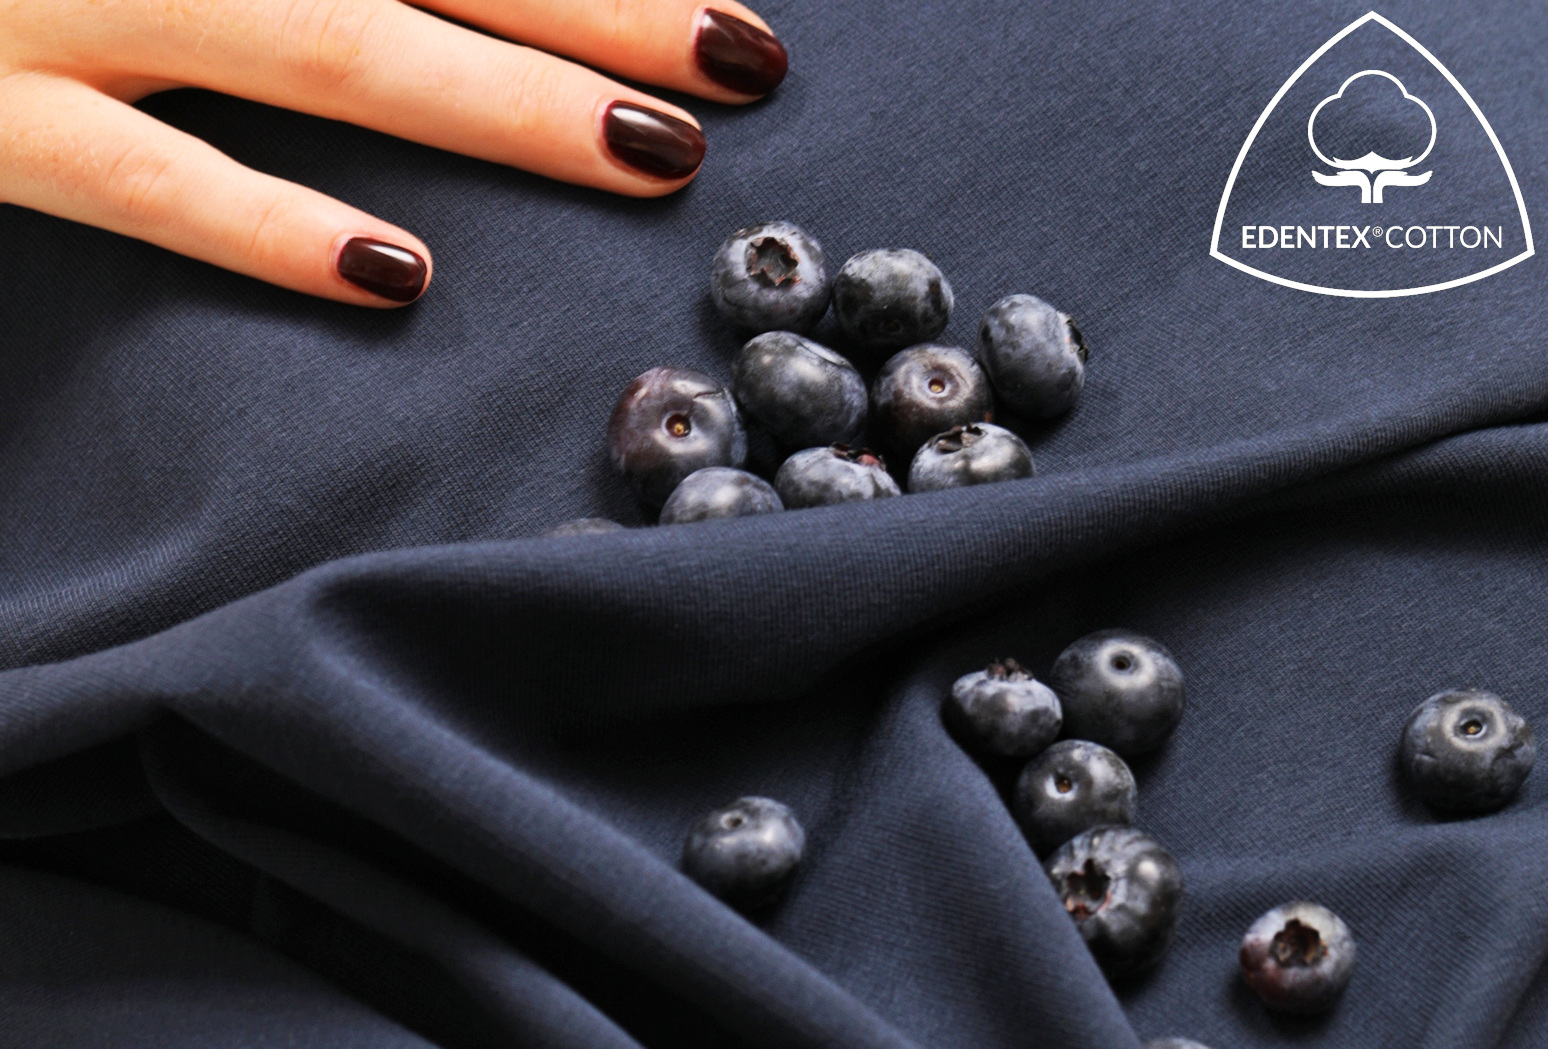 For delightfully soft touch and durability of fabrics, EDENTEX SOFT FINISHING™ was created.